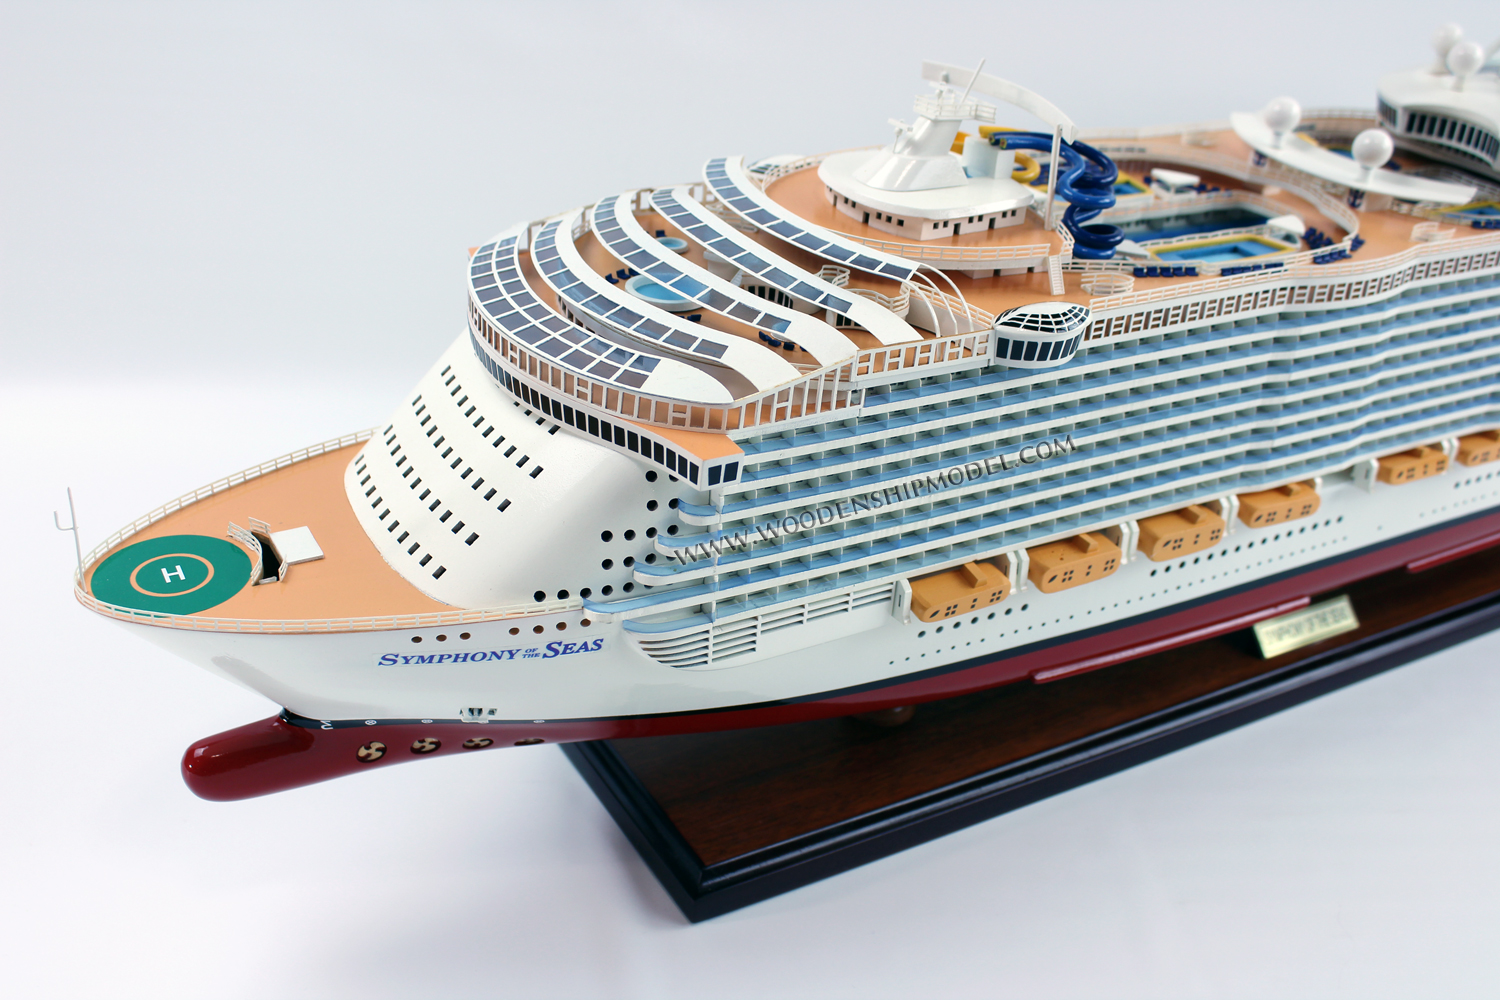 Hand-crafted Symphony of the Seas Model Ship, scale Symphony of the Seas model ship, ship model Symphony of the Seas, wooden ship model Symphony of the Seas, hand-made ship model Symphony of the Seas with lights, display ship model Symphony of the Seas, Symphony of the Seas model, woodenshipmodel, woodenmodelboat, gianhien, gia nhien co., ltd, gia nhien co model boat and ship builder